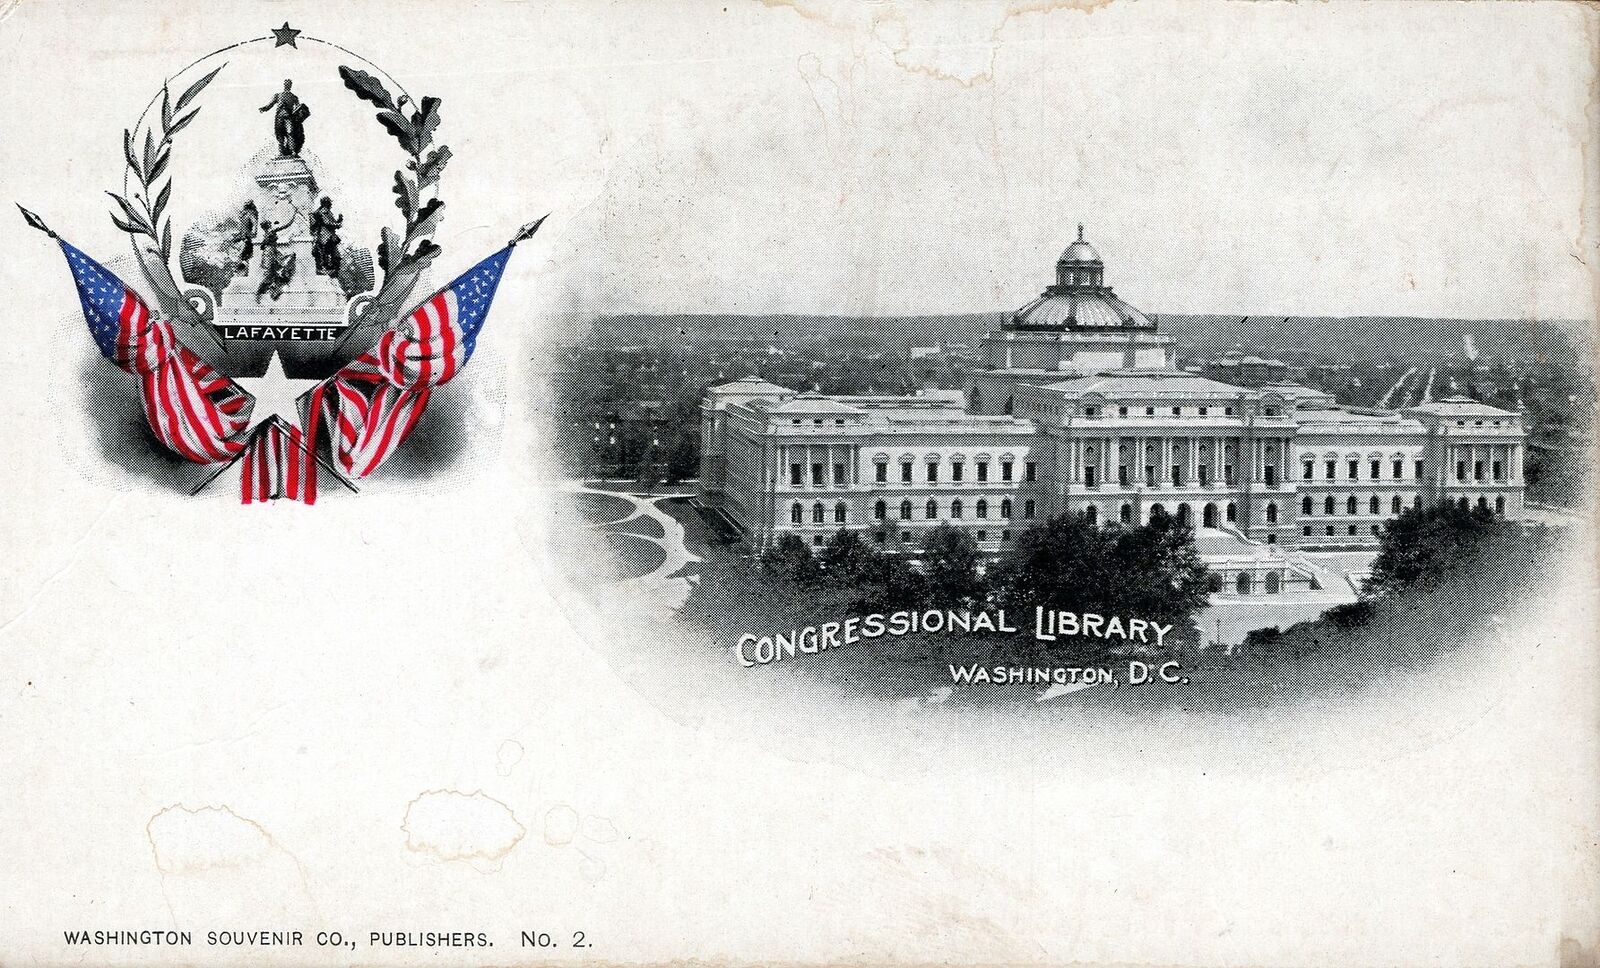 WASHINGTON DC - Congressional Library Private Mailing Card (1898-1901)